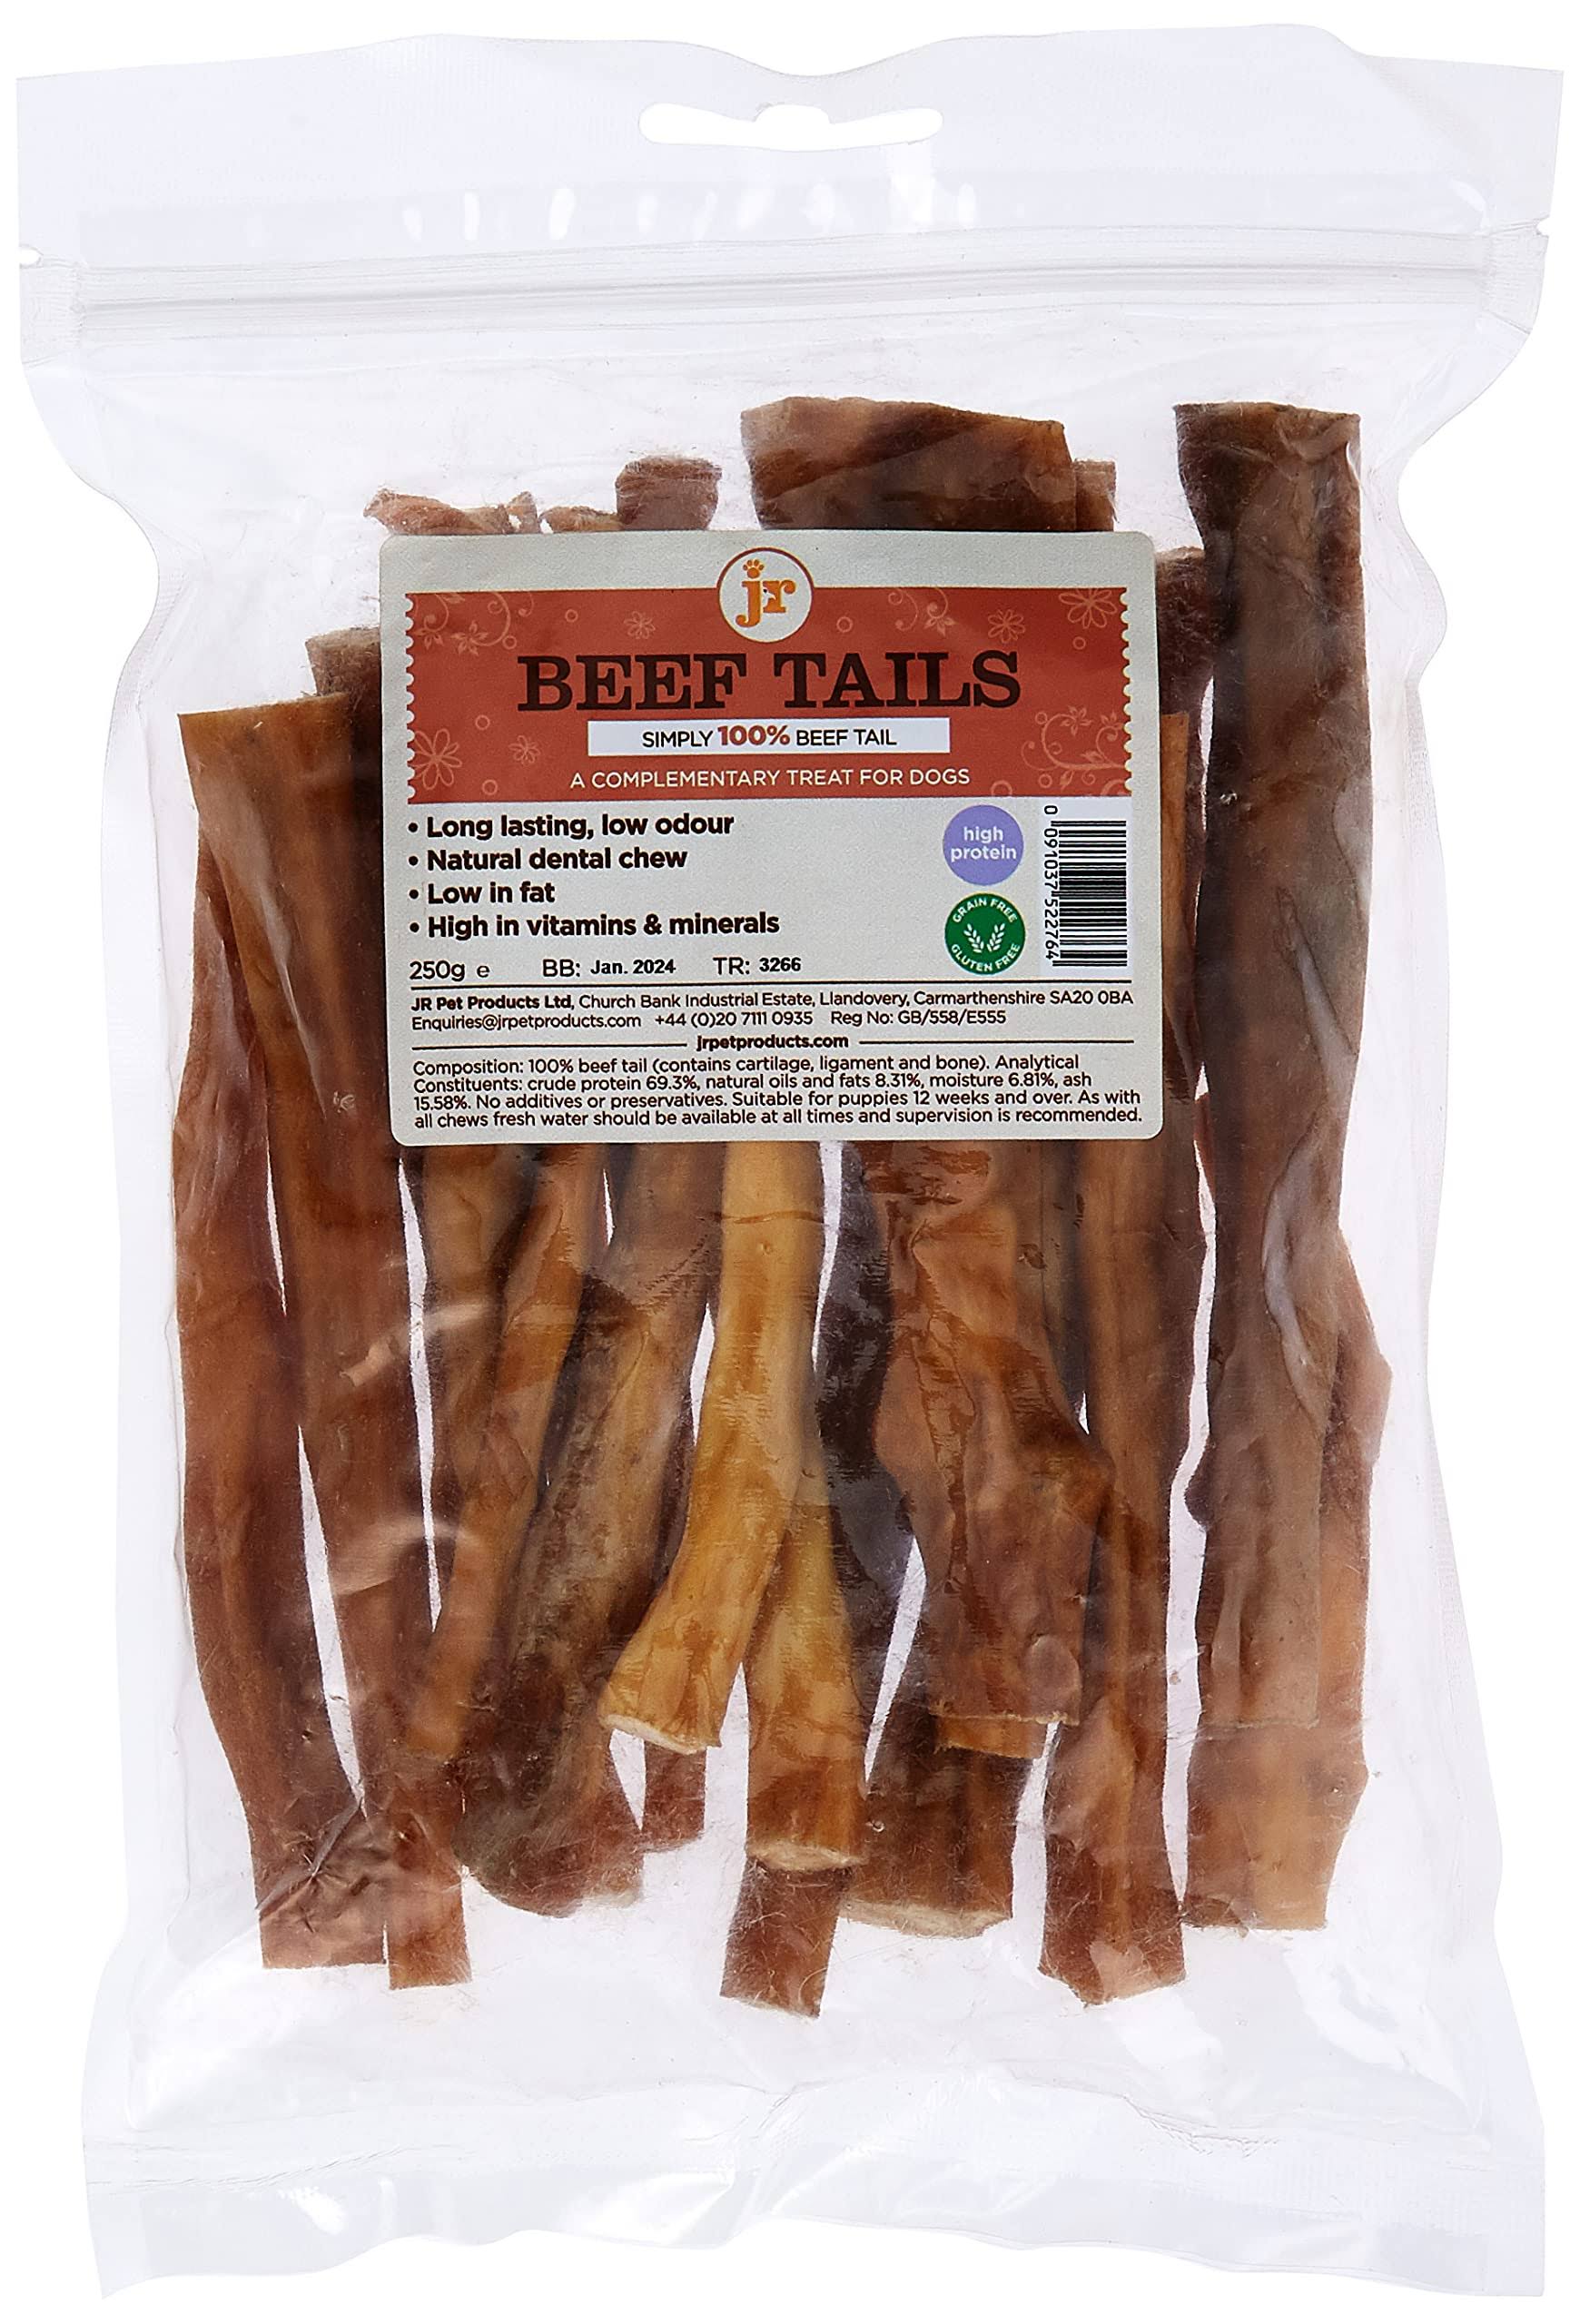 Jr Pet Products Premium Beef Tails for Dogs from UK